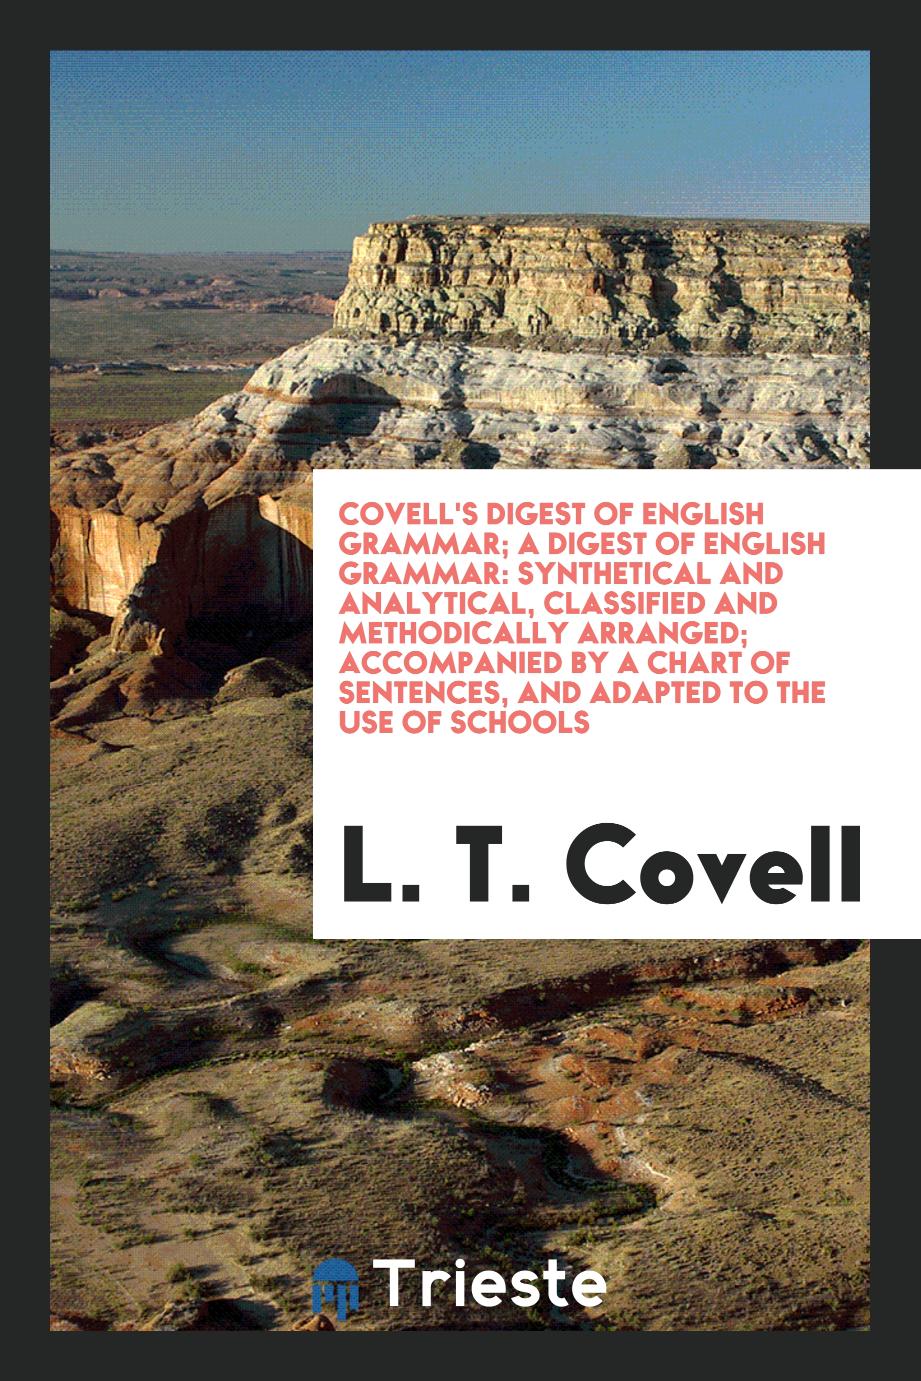 Covell's Digest of English Grammar; A Digest of English Grammar: Synthetical and Analytical, Classified and Methodically Arranged; Accompanied by a Chart of Sentences, and Adapted to the Use of Schools